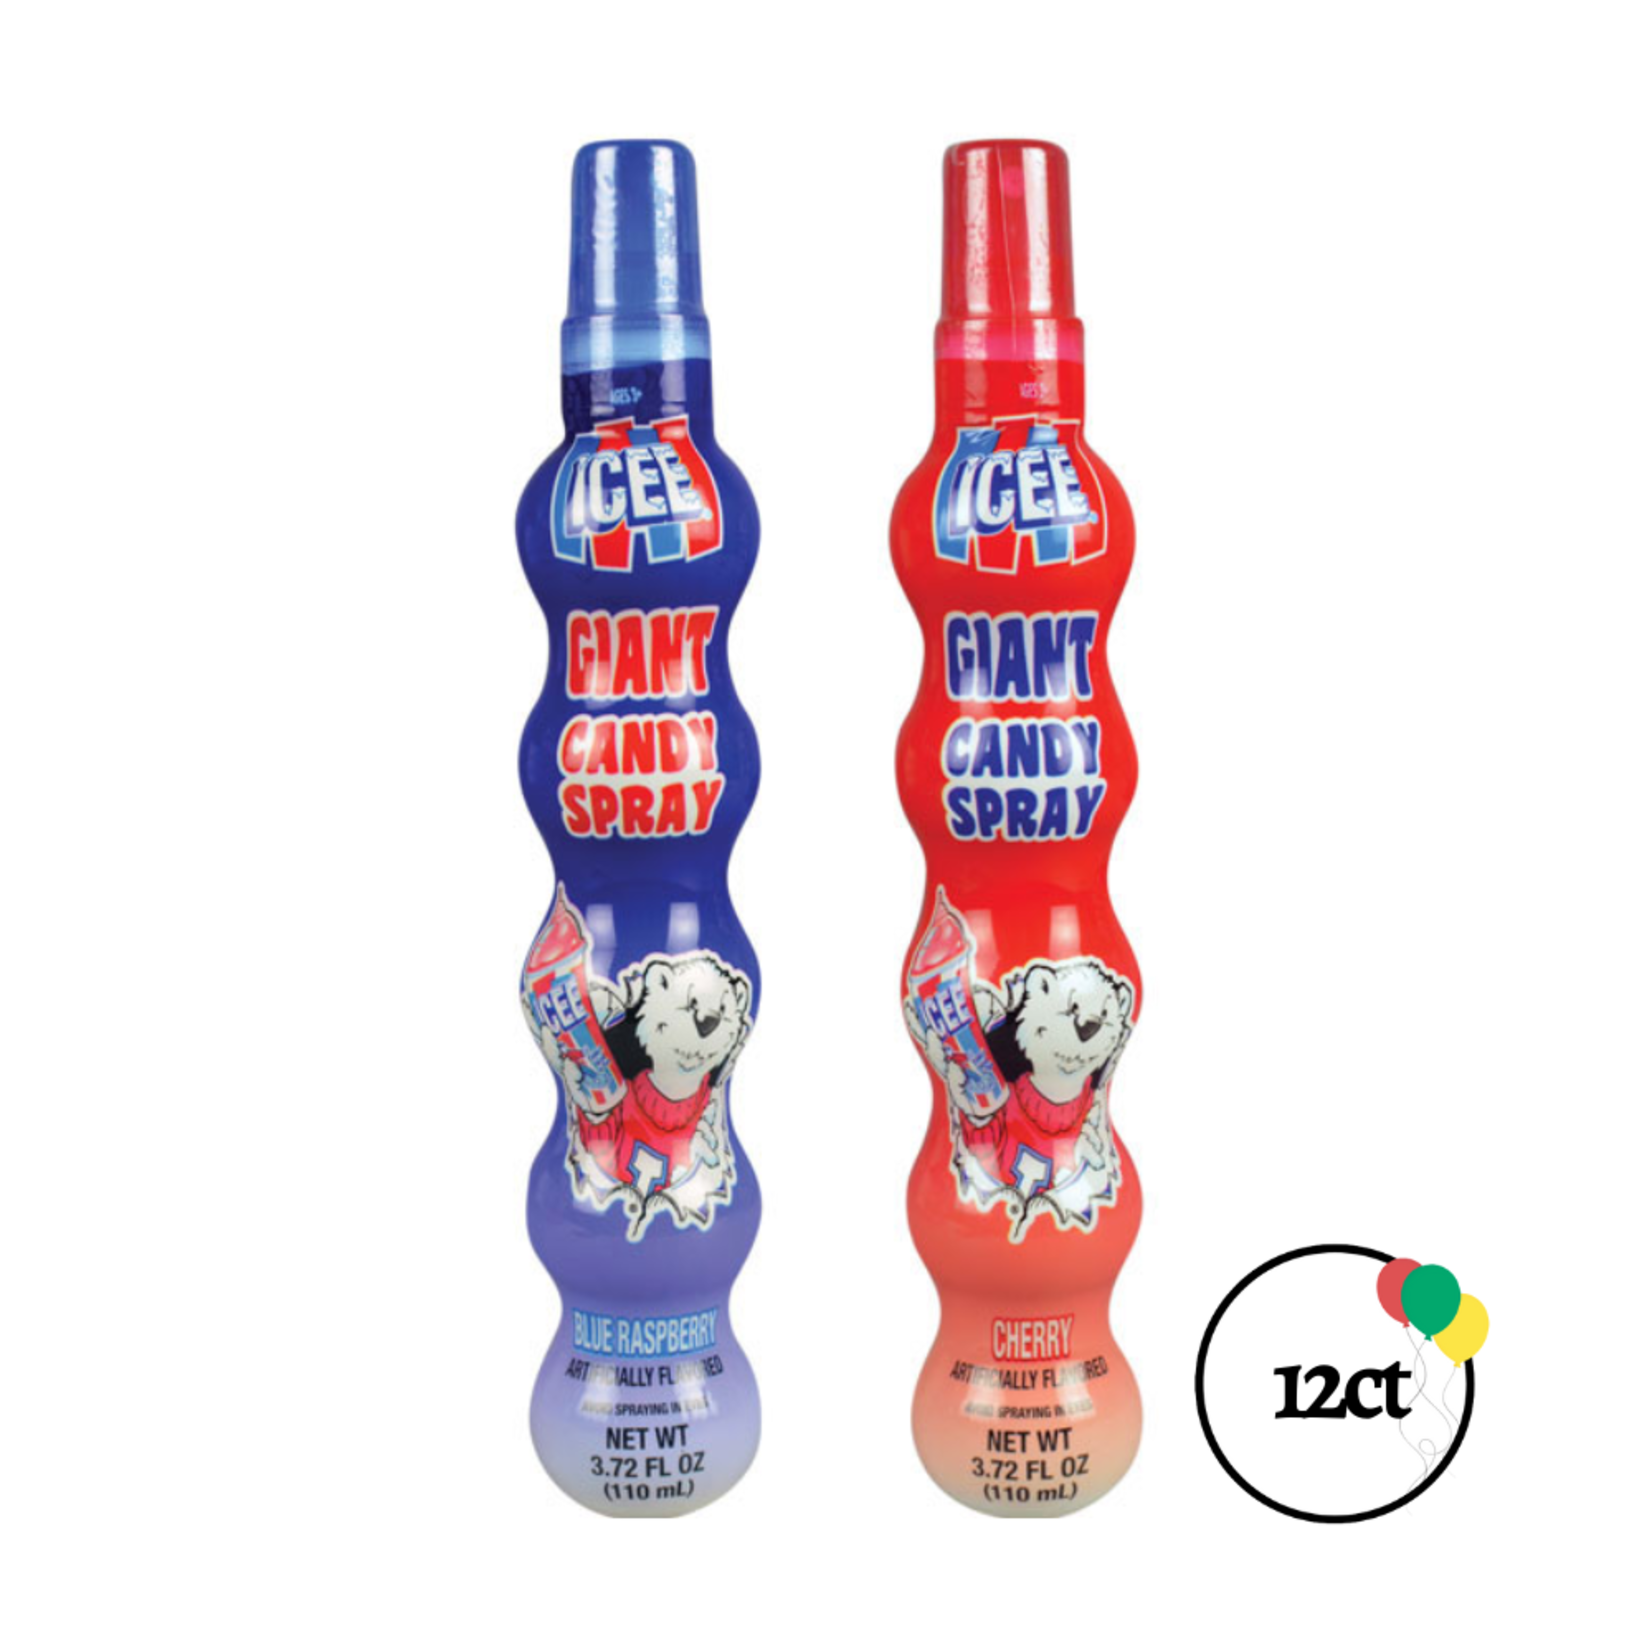 ICEE Giant Candy Spray 12ct